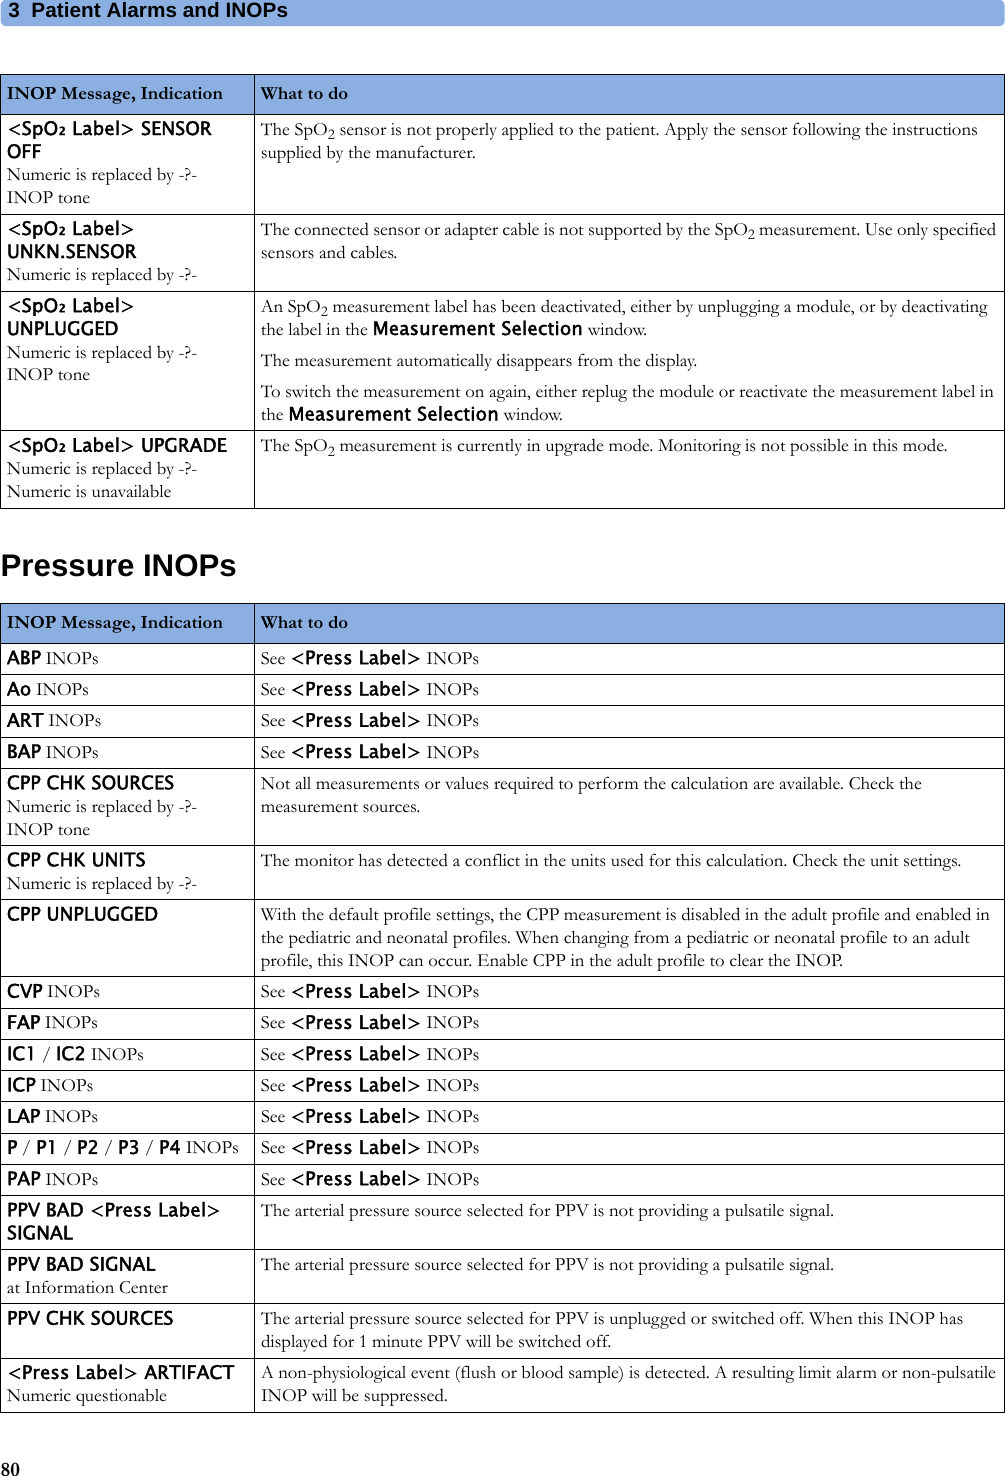 3 Patient Alarms and INOPs80Pressure INOPs&lt;SpO₂ Label&gt; SENSOR OFFNumeric is replaced by -?-INOP toneThe SpO2 sensor is not properly applied to the patient. Apply the sensor following the instructions supplied by the manufacturer.&lt;SpO₂ Label&gt; UNKN.SENSORNumeric is replaced by -?-The connected sensor or adapter cable is not supported by the SpO2 measurement. Use only specified sensors and cables.&lt;SpO₂ Label&gt; UNPLUGGEDNumeric is replaced by -?-INOP toneAn SpO2 measurement label has been deactivated, either by unplugging a module, or by deactivating the label in the Measurement Selection window.The measurement automatically disappears from the display.To switch the measurement on again, either replug the module or reactivate the measurement label in the Measurement Selection window.&lt;SpO₂ Label&gt; UPGRADENumeric is replaced by -?-Numeric is unavailableThe SpO2 measurement is currently in upgrade mode. Monitoring is not possible in this mode.INOP Message, Indication What to do INOP Message, Indication What to do ABP INOPs See &lt;Press Label&gt; INOPsAo INOPs See &lt;Press Label&gt; INOPsART INOPs See &lt;Press Label&gt; INOPsBAP INOPs See &lt;Press Label&gt; INOPsCPP CHK SOURCESNumeric is replaced by -?-INOP toneNot all measurements or values required to perform the calculation are available. Check the measurement sources.CPP CHK UNITSNumeric is replaced by -?-The monitor has detected a conflict in the units used for this calculation. Check the unit settings.CPP UNPLUGGED With the default profile settings, the CPP measurement is disabled in the adult profile and enabled in the pediatric and neonatal profiles. When changing from a pediatric or neonatal profile to an adult profile, this INOP can occur. Enable CPP in the adult profile to clear the INOP.CVP INOPs See &lt;Press Label&gt; INOPsFAP INOPs See &lt;Press Label&gt; INOPsIC1 / IC2 INOPs See &lt;Press Label&gt; INOPsICP INOPs See &lt;Press Label&gt; INOPsLAP INOPs See &lt;Press Label&gt; INOPsP / P1 / P2 / P3 / P4 INOPs See &lt;Press Label&gt; INOPsPAP INOPs See &lt;Press Label&gt; INOPsPPV BAD &lt;Press Label&gt; SIGNALThe arterial pressure source selected for PPV is not providing a pulsatile signal.PPV BAD SIGNALat Information CenterThe arterial pressure source selected for PPV is not providing a pulsatile signal.PPV CHK SOURCES The arterial pressure source selected for PPV is unplugged or switched off. When this INOP has displayed for 1 minute PPV will be switched off.&lt;Press Label&gt; ARTIFACTNumeric questionableA non-physiological event (flush or blood sample) is detected. A resulting limit alarm or non-pulsatile INOP will be suppressed.